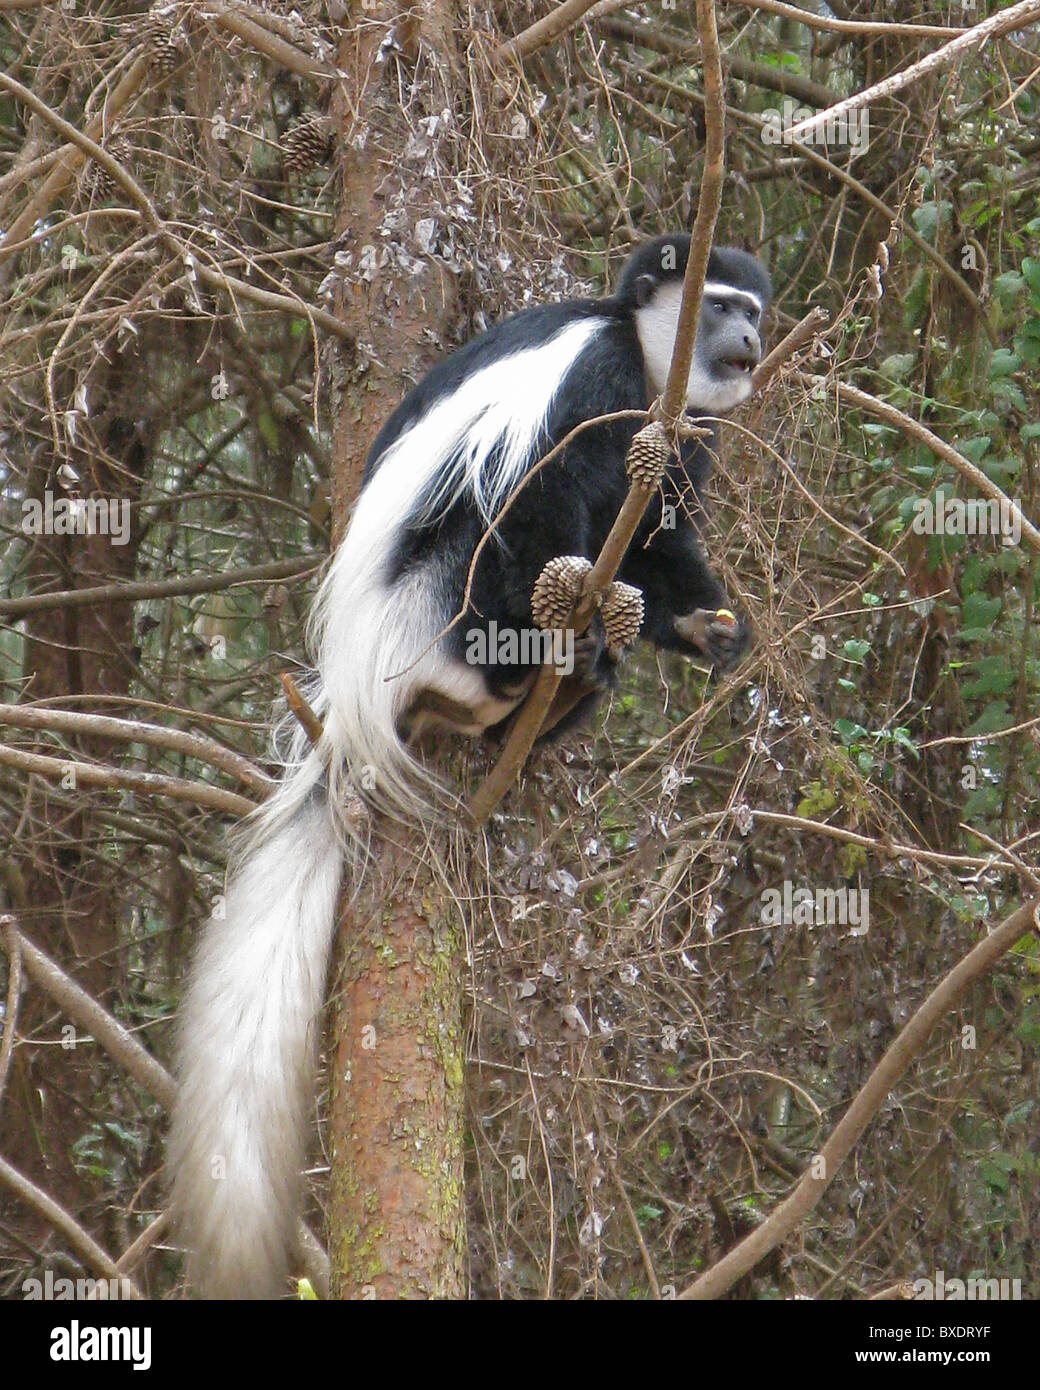 A black and white Colobus monkey rests in an evergreen tree branch, spooked from stealing potatoes in a field near Kilimanjaro. Stock Photo